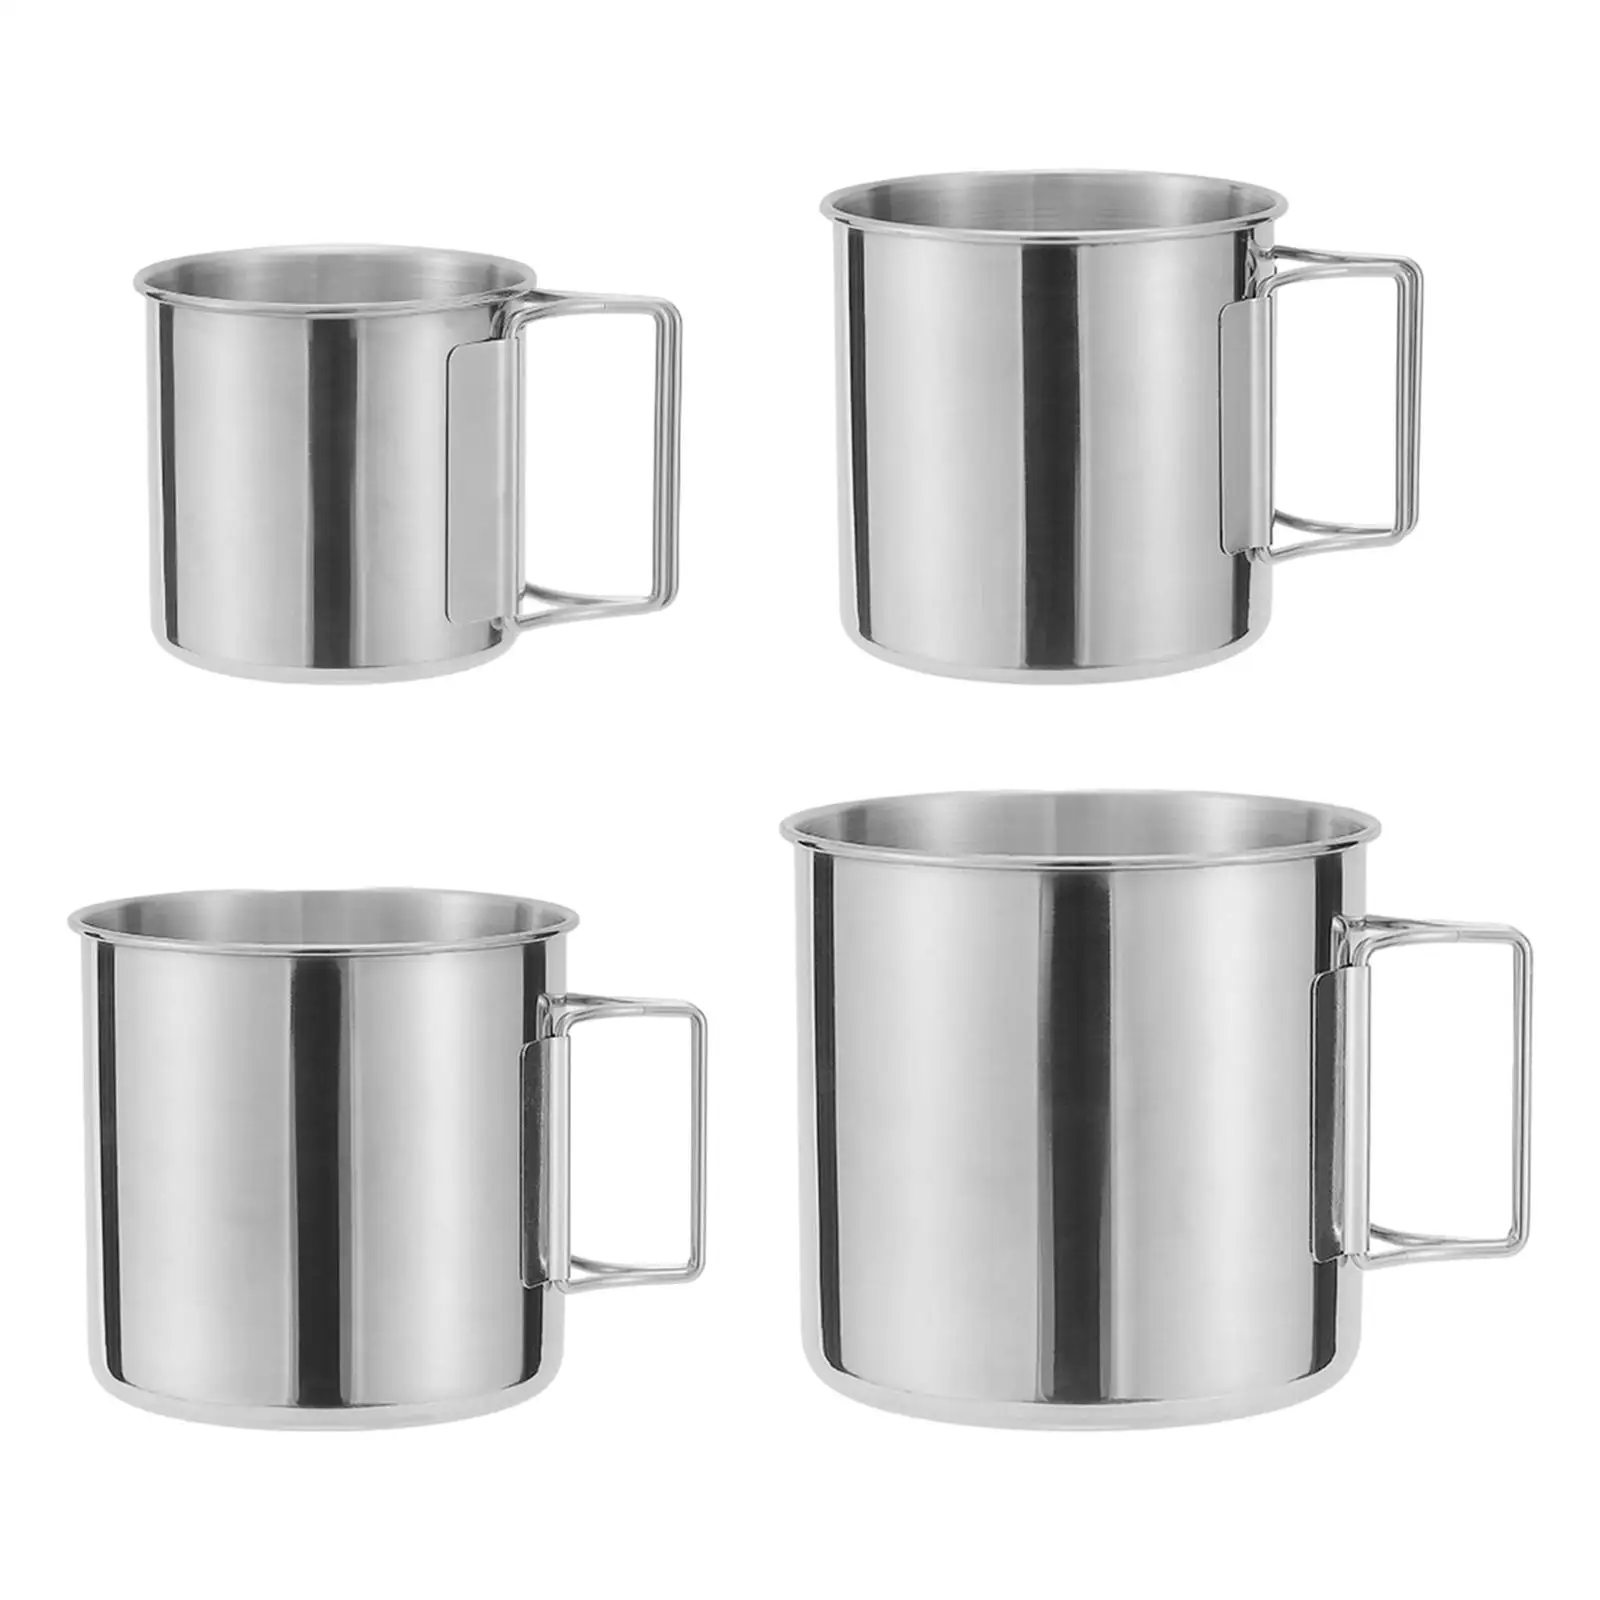 Camping Mug Kitchenware Portable Cookware Stainless Steel Tea Coffee Mugs for Picnic Fishing Barbecue Mountaineering Outdoors